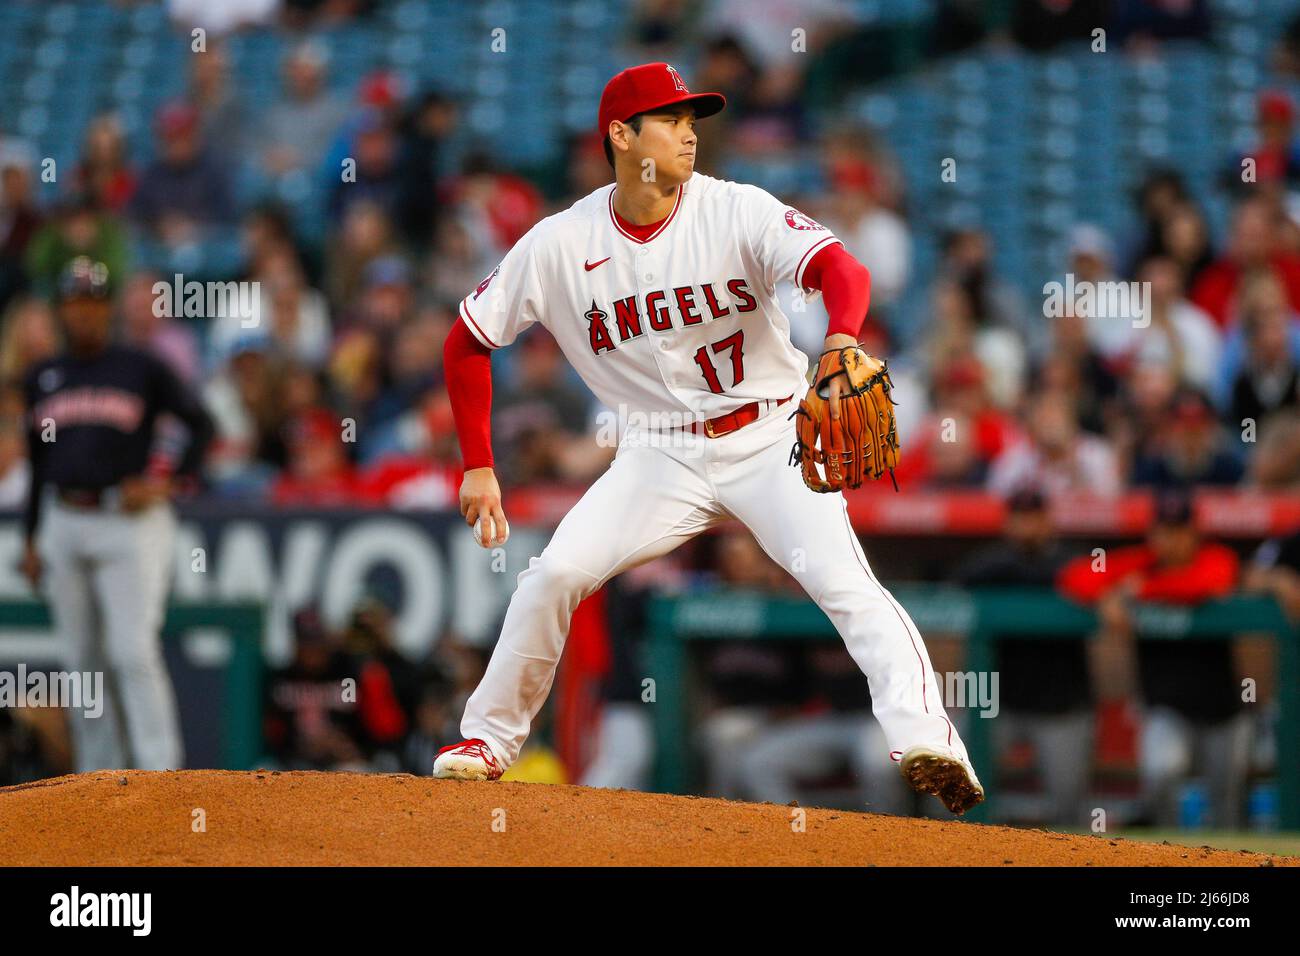 Los Angeles Angels pitcher Shohei Ohtani (17) pitches the ball during an MLB regular season game against the Cleveland Guardians, Wednesday, April 27t Stock Photo